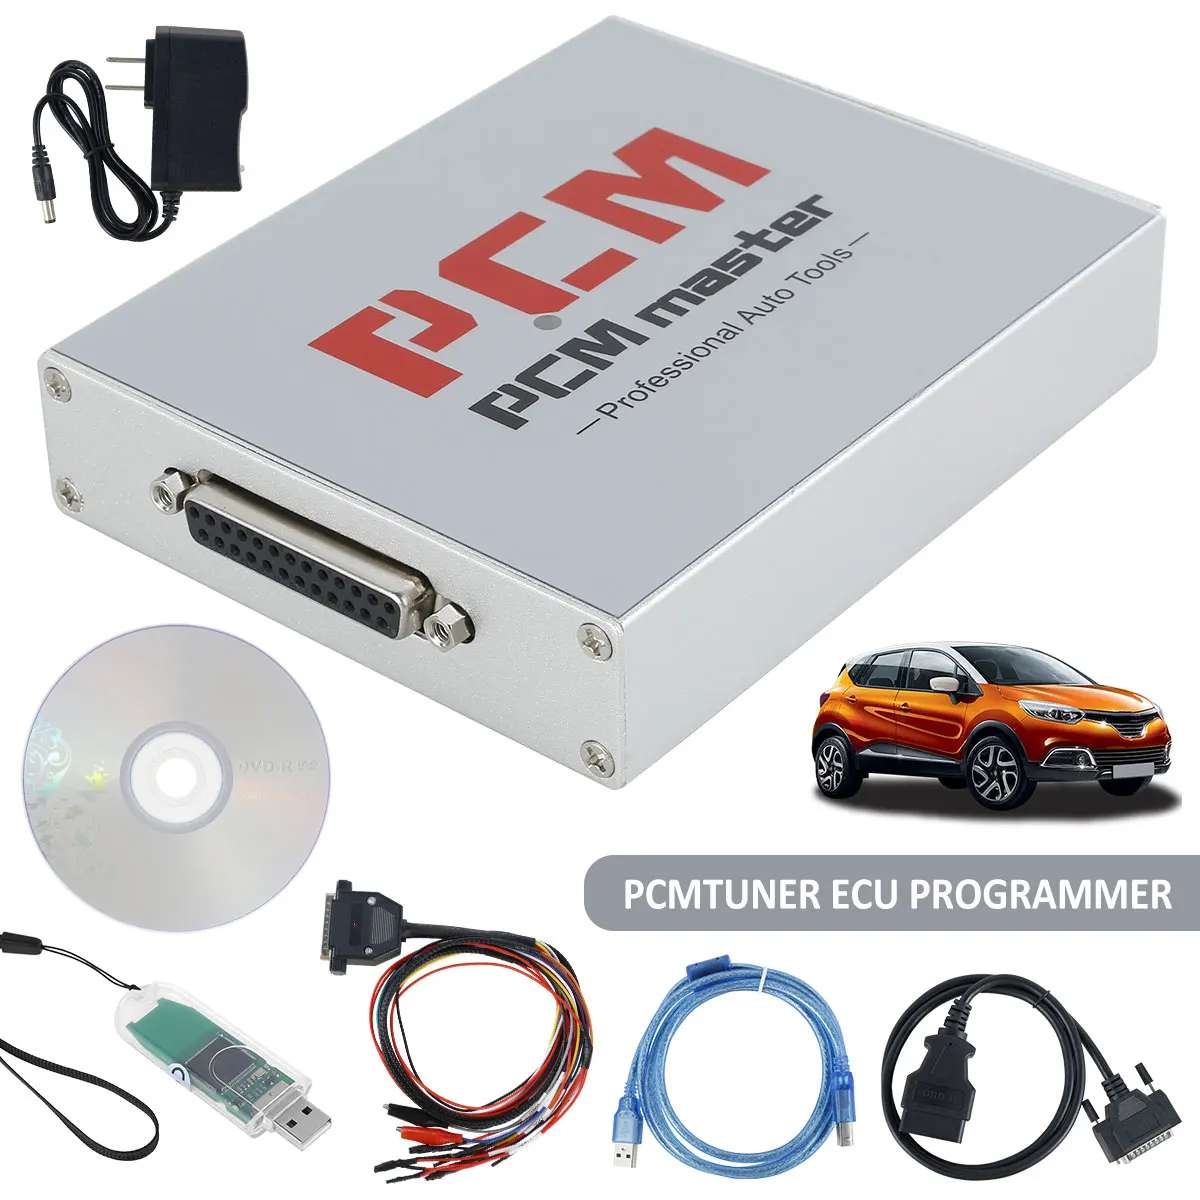 

new ECU Programming Tool Professional PCMtuner Software Version 1.21 with 67 Modules Online Update Support Checksum and Pinout